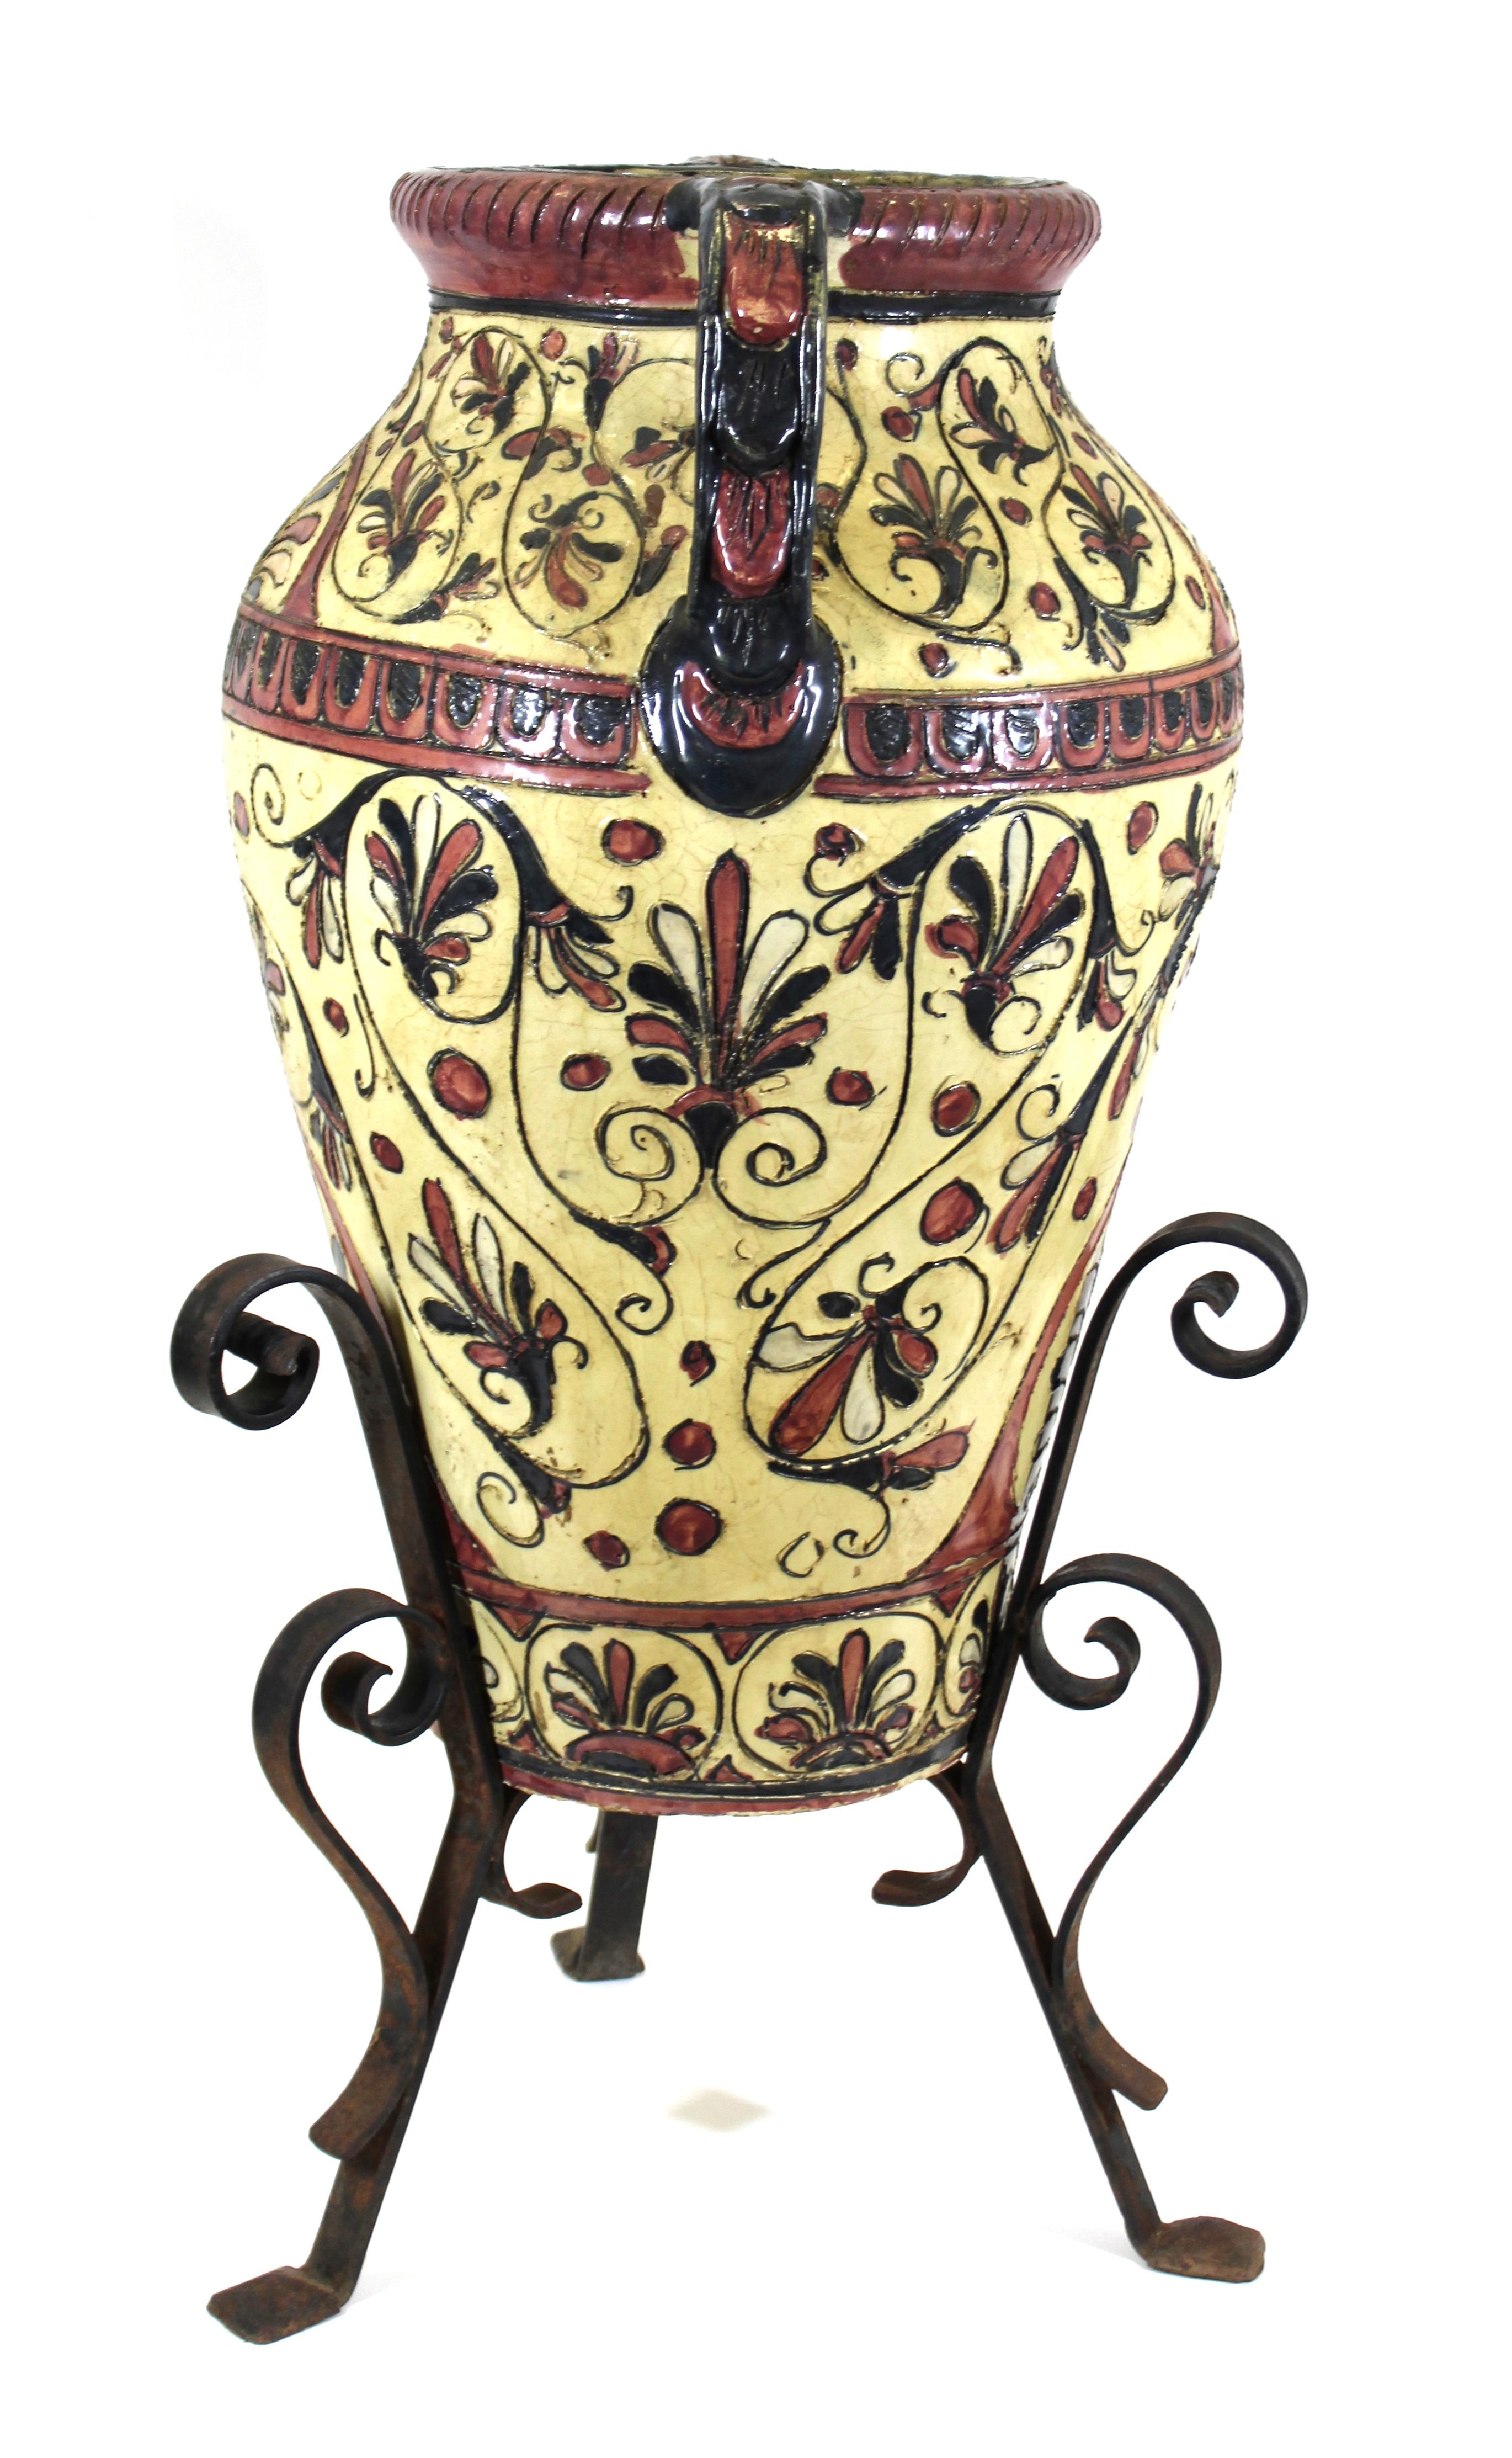 Italian neoclassical revival pottery large floor urn with ornamental sgraffito relief depicting palmettes, in pink, cream and black. The urn is placed atop its original wrought iron base. Created in Italy during the 1890s, it is marked 'made in